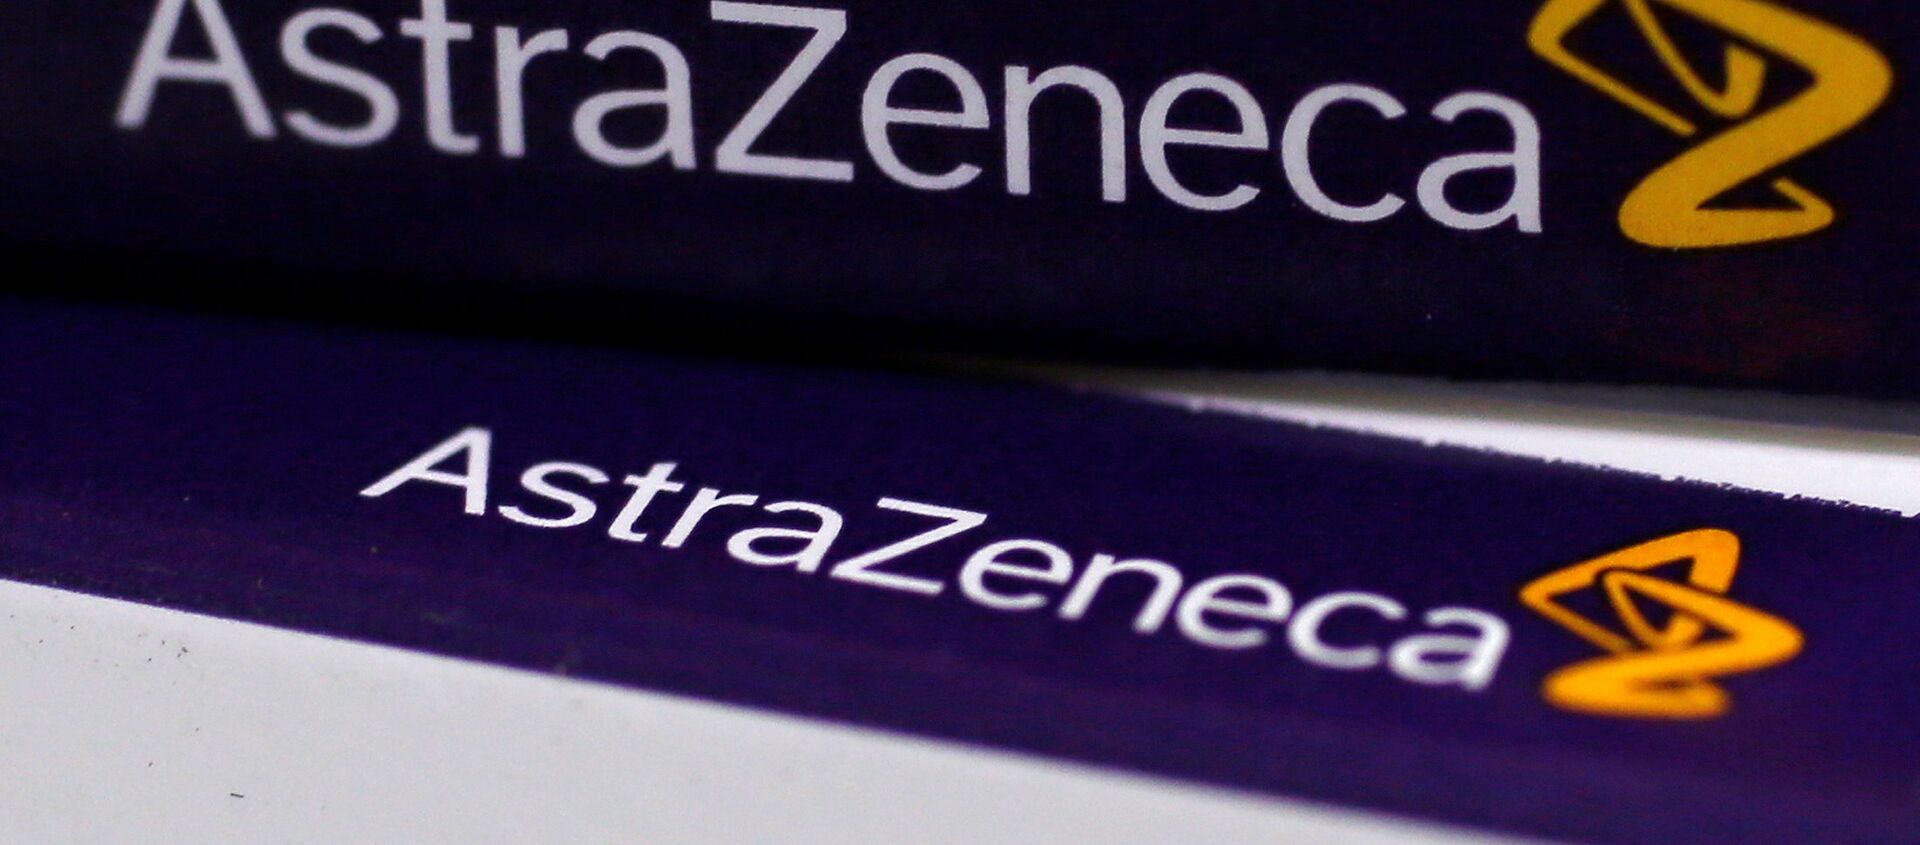 FILE PHOTO:The logo of AstraZeneca is seen on medication packages in a pharmacy in London. - Sputnik International, 1920